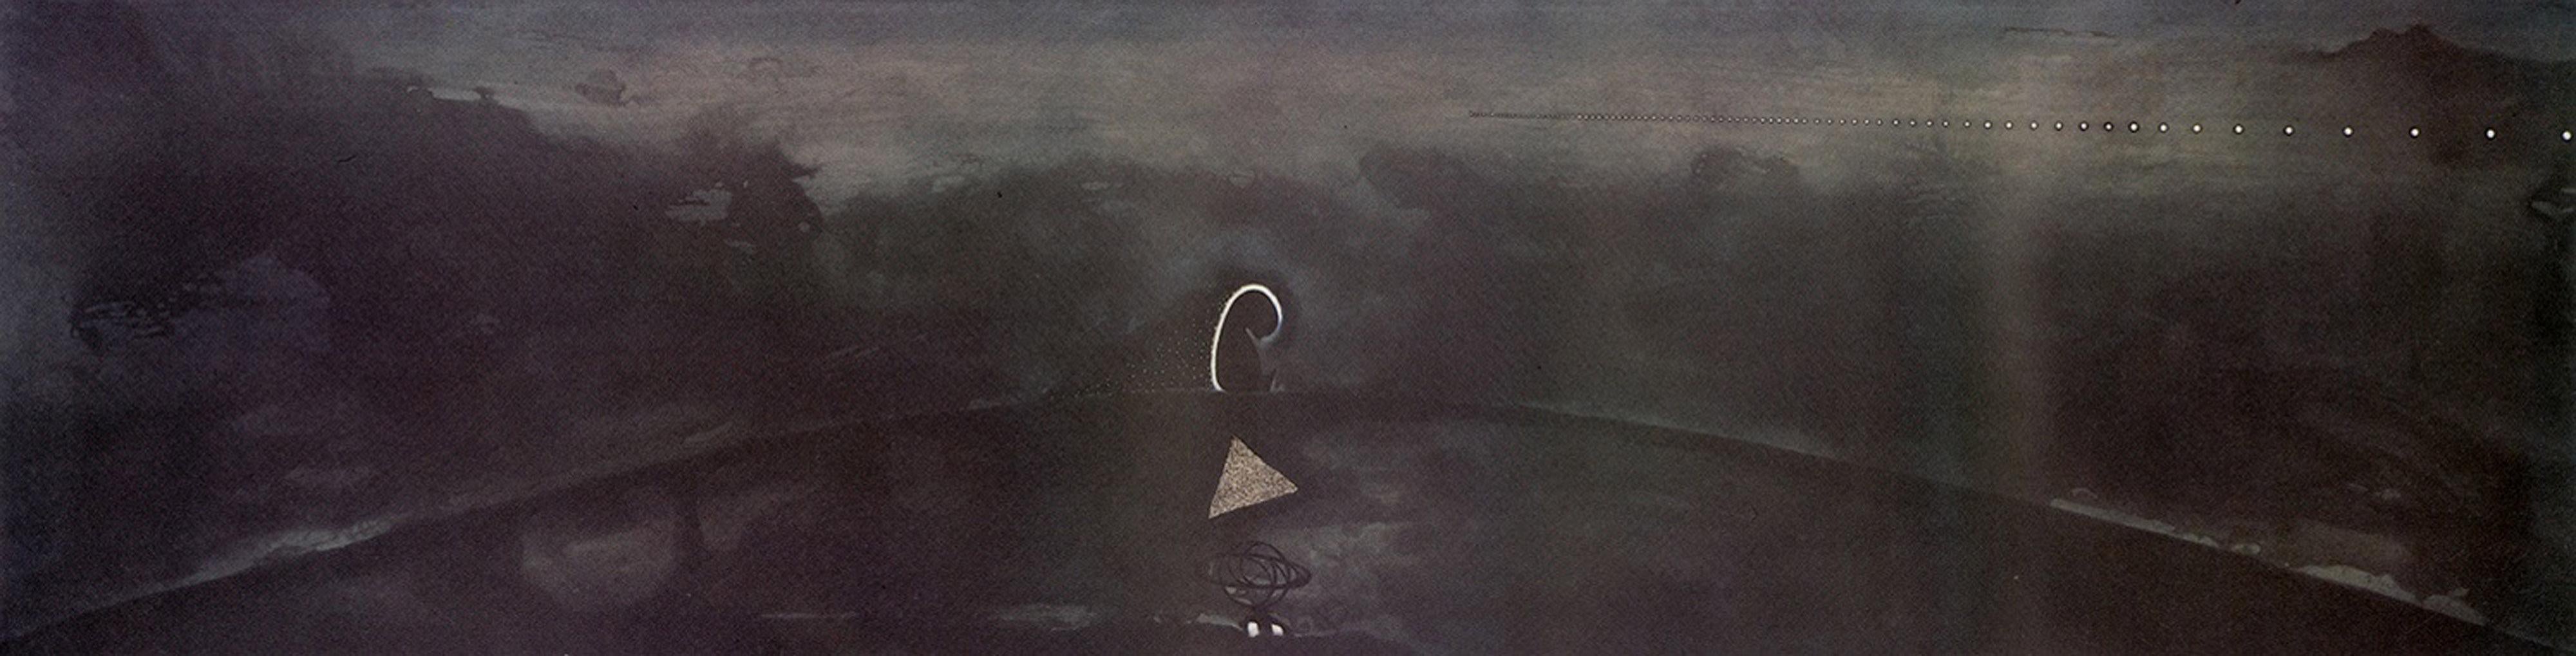 Sparire means "to disappear" in Italian. This large-scale, dreamlike print spans almost ten feet. 
Enzo Cucchi
Sparire II, 1988
Color etching, aquatint and silkscreen
30 1/2 × 118 in  77.5 × 299.7 cm
Edition of 45